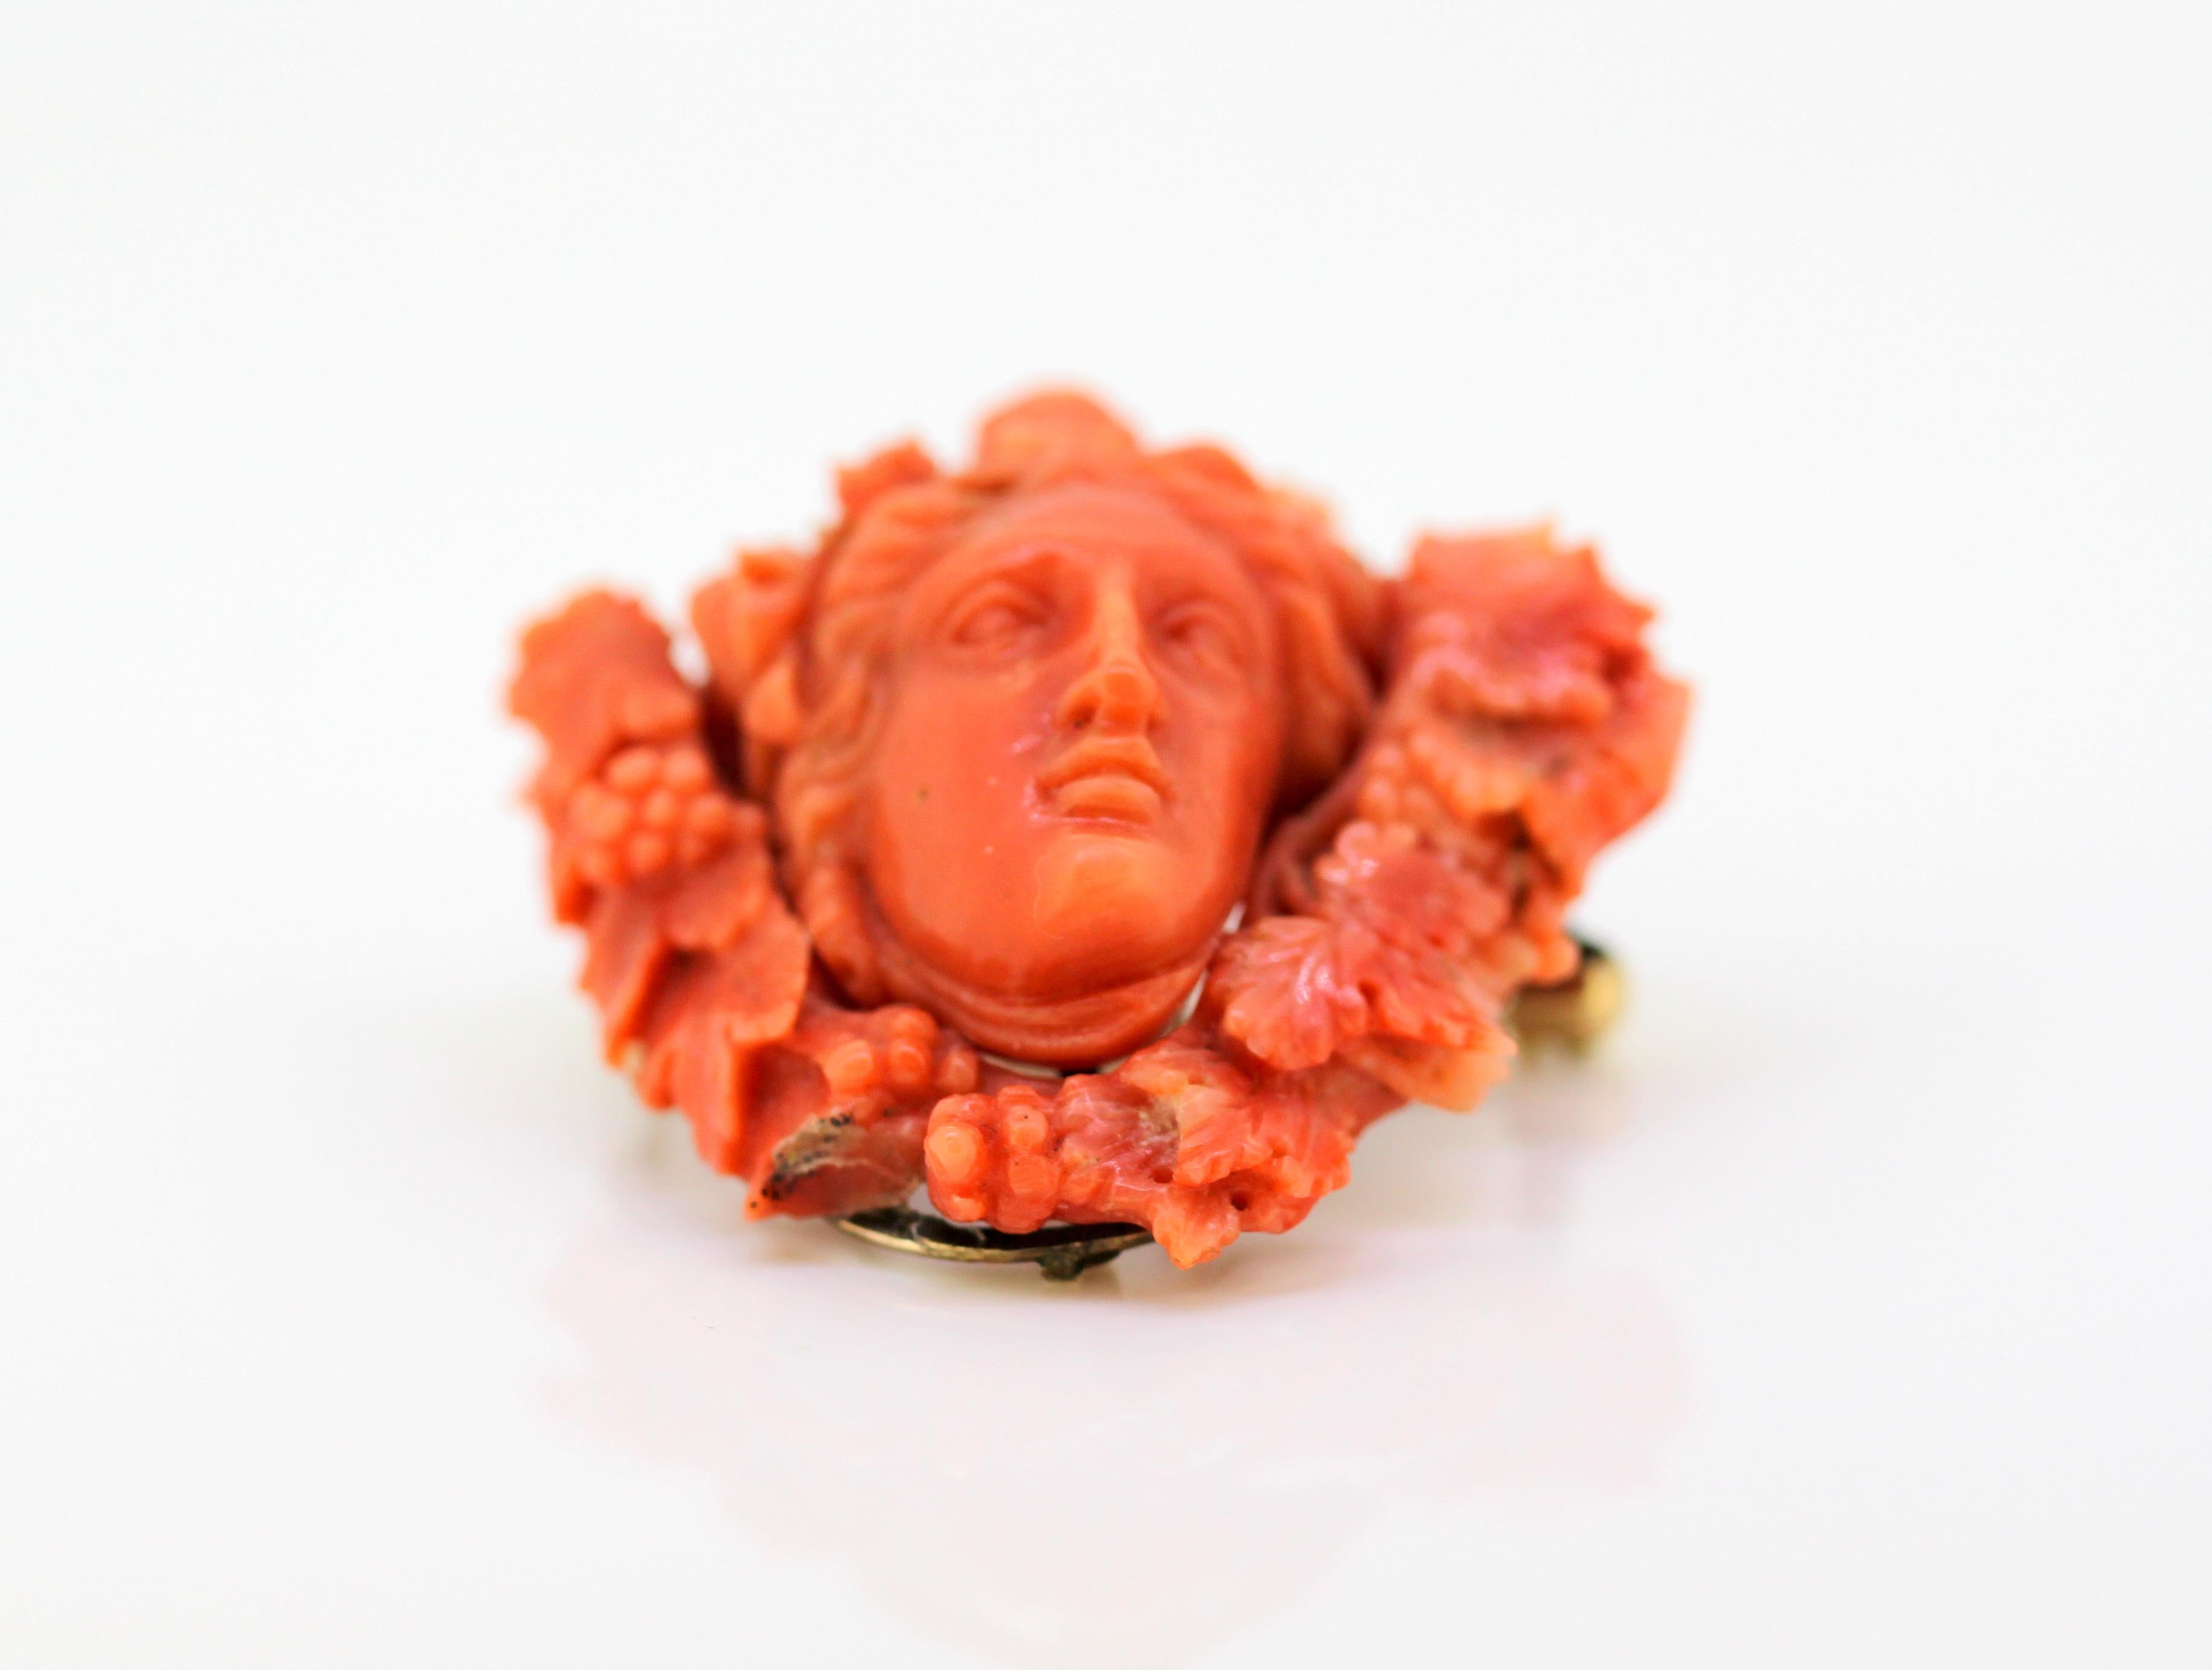 Antique Victorian carved coral brooch / pendant with 15k gold
Circa 1880's

Approx Dimensions - 
Size : 5.2 x 4.4 x 2.3 cm
Weight : 25 grams

Condition: Carved coral has a small chip on the bottom (see picture 2), general wear and subtle signs of